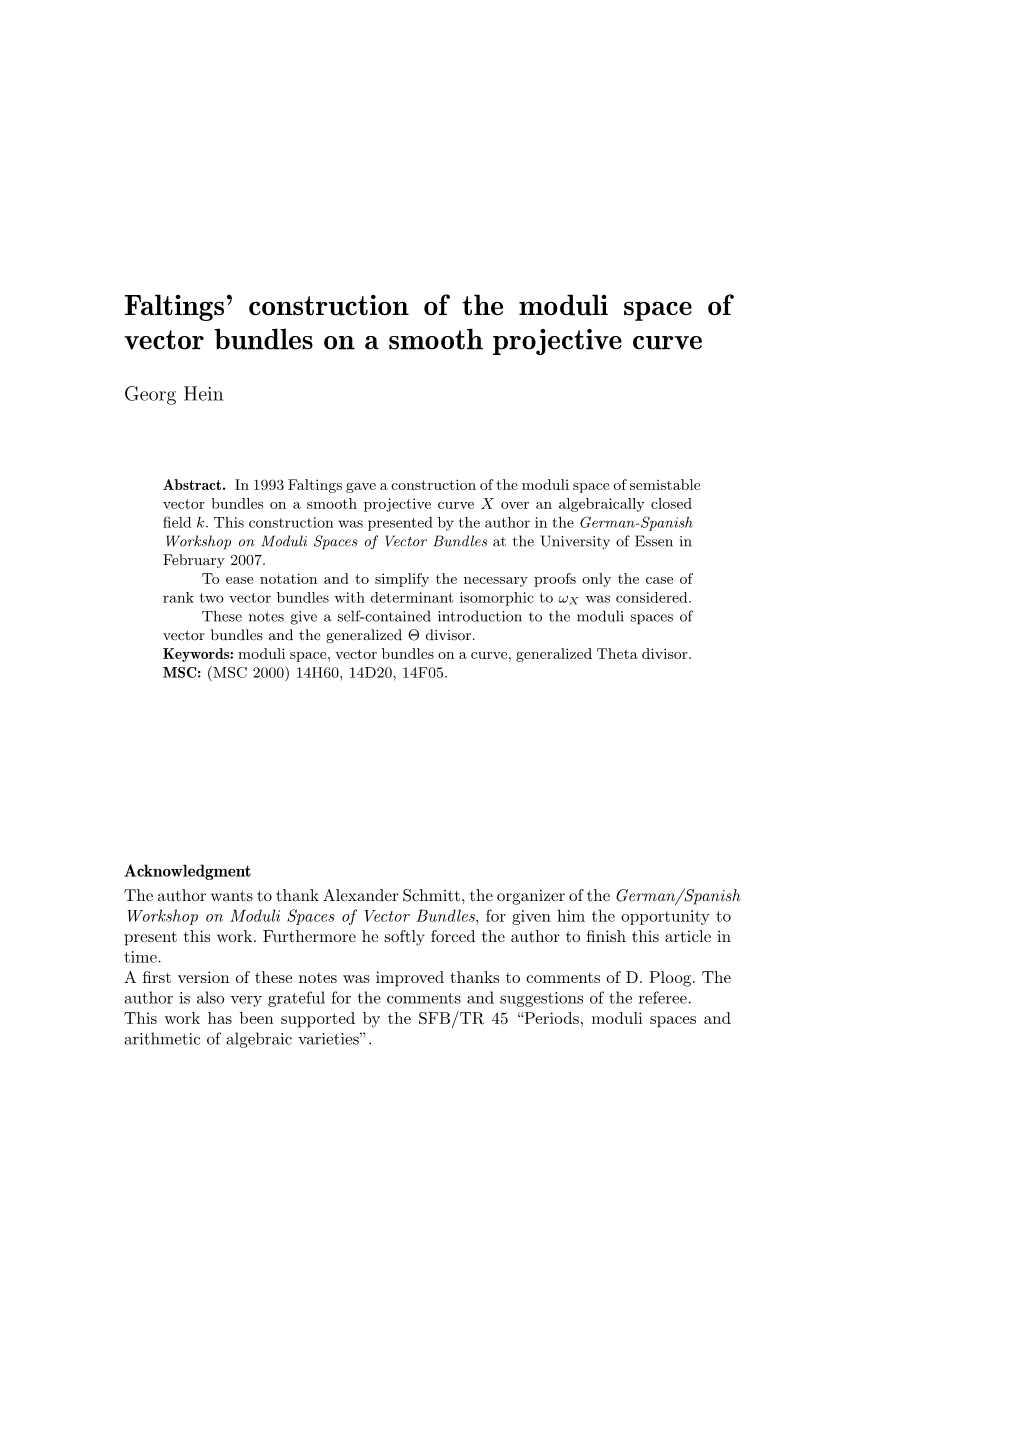 Faltings' Construction of the Moduli Space of Vector Bundles on A